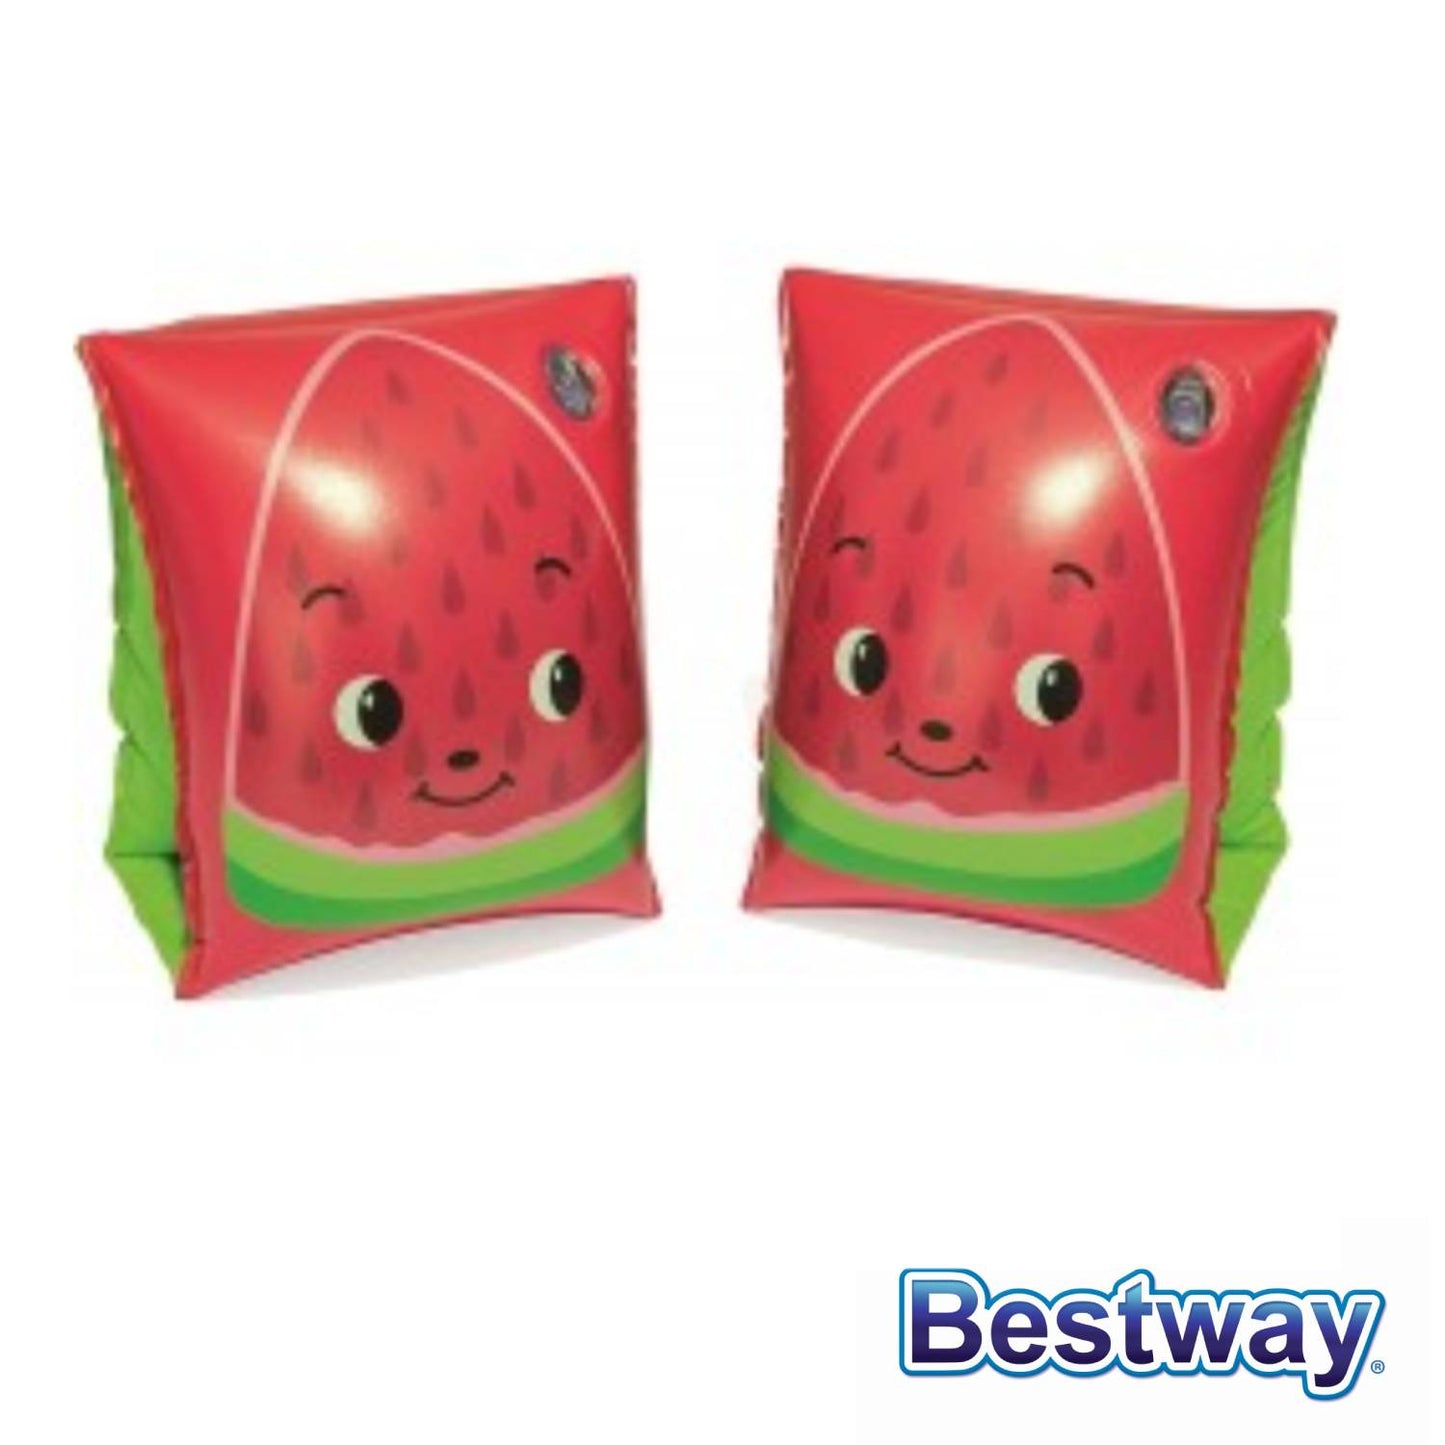 Bestway - Fruit armrests Cm. 23X15, Strawberry And Pineapple